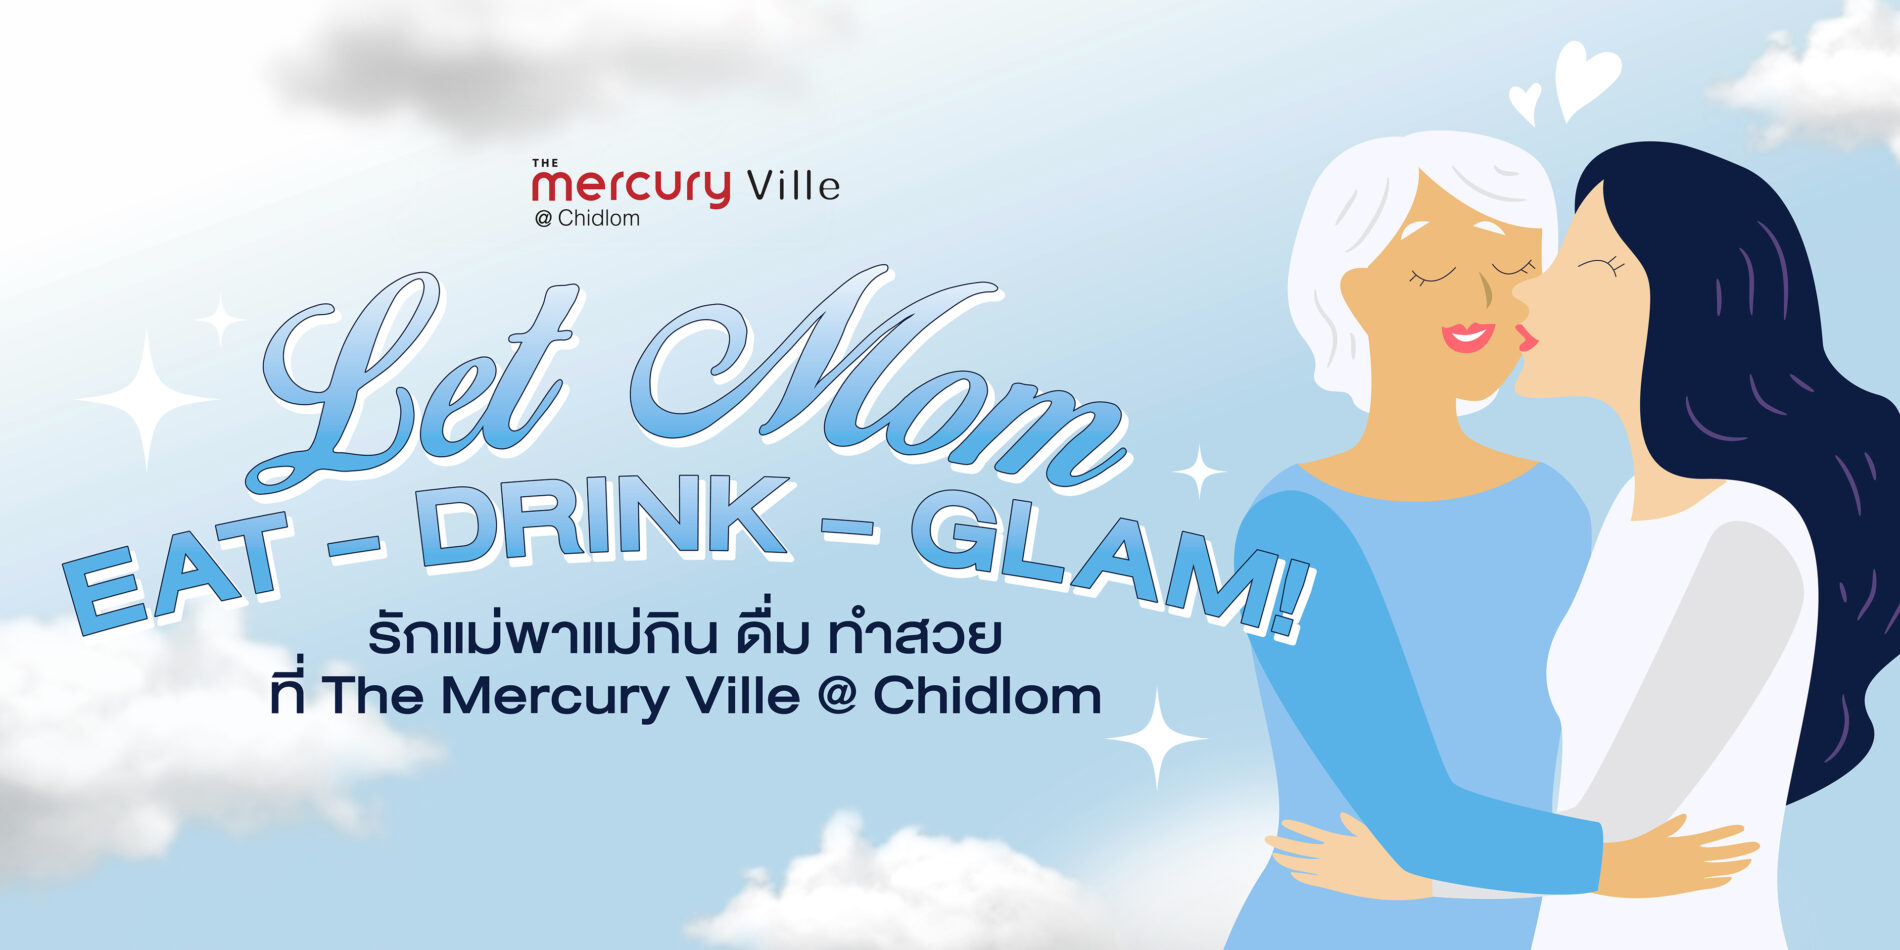 Let Mom Eat - Drink - Glam at The Mercury Ville @ Chidlom